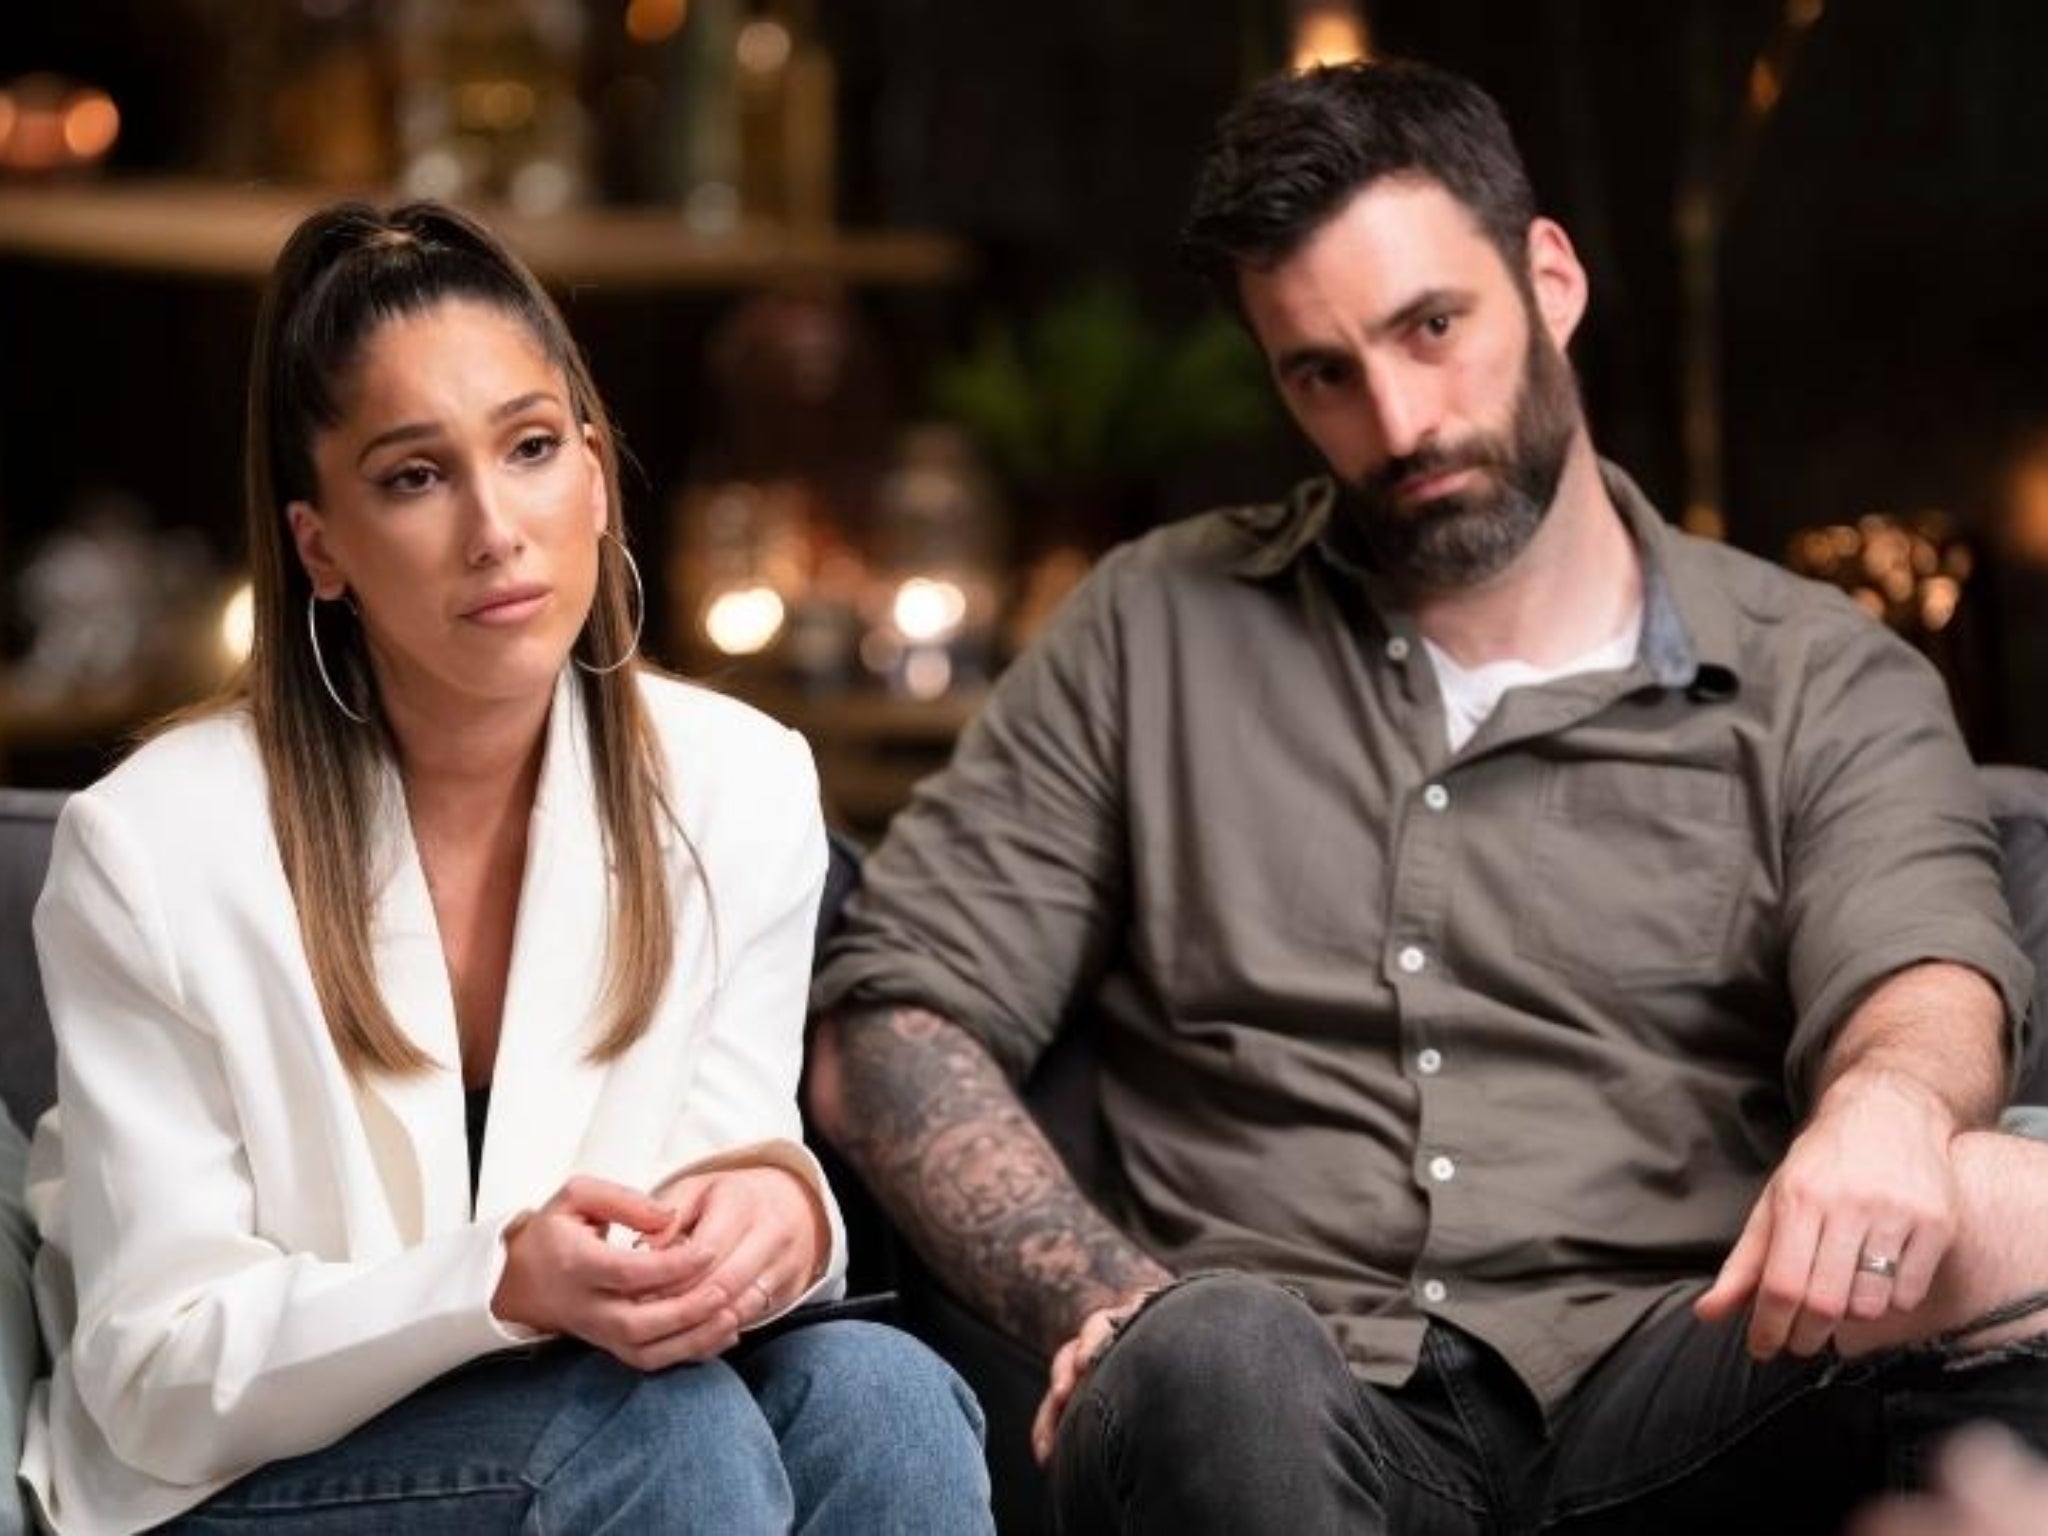 Fans react to toxic masculinity in season nine of MAFS Australia How regressive is Selin? The Independent pic